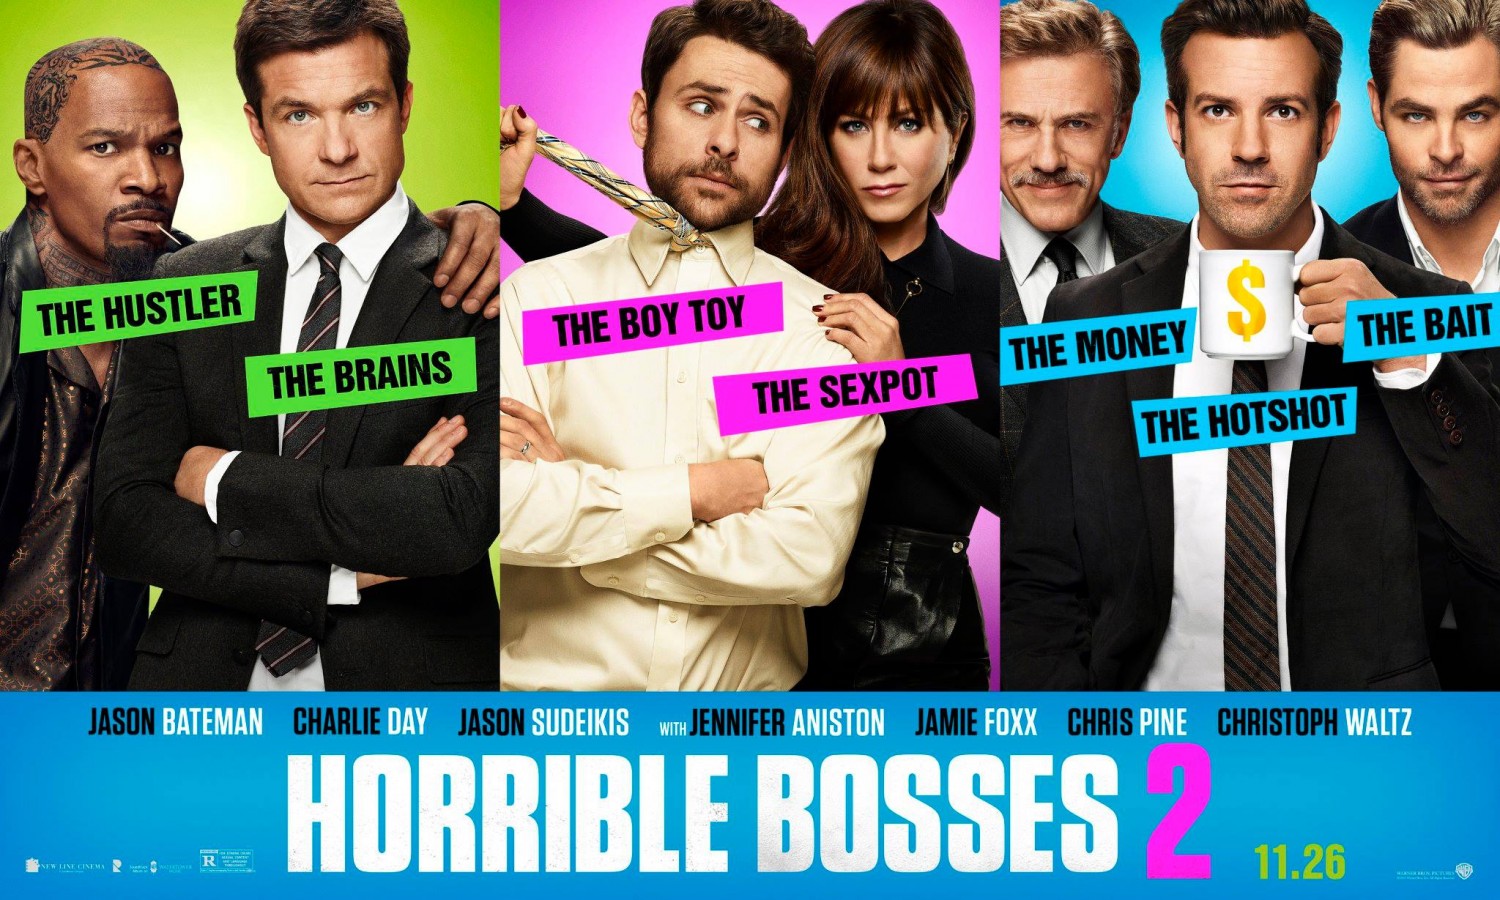 How Do You Like Me Now Несносные боссы 2 [2014] \ Horrible Bosses 2 [2014][vk.com/amazingmovies_music] | The Heavy feat. The Dap Kings Horns